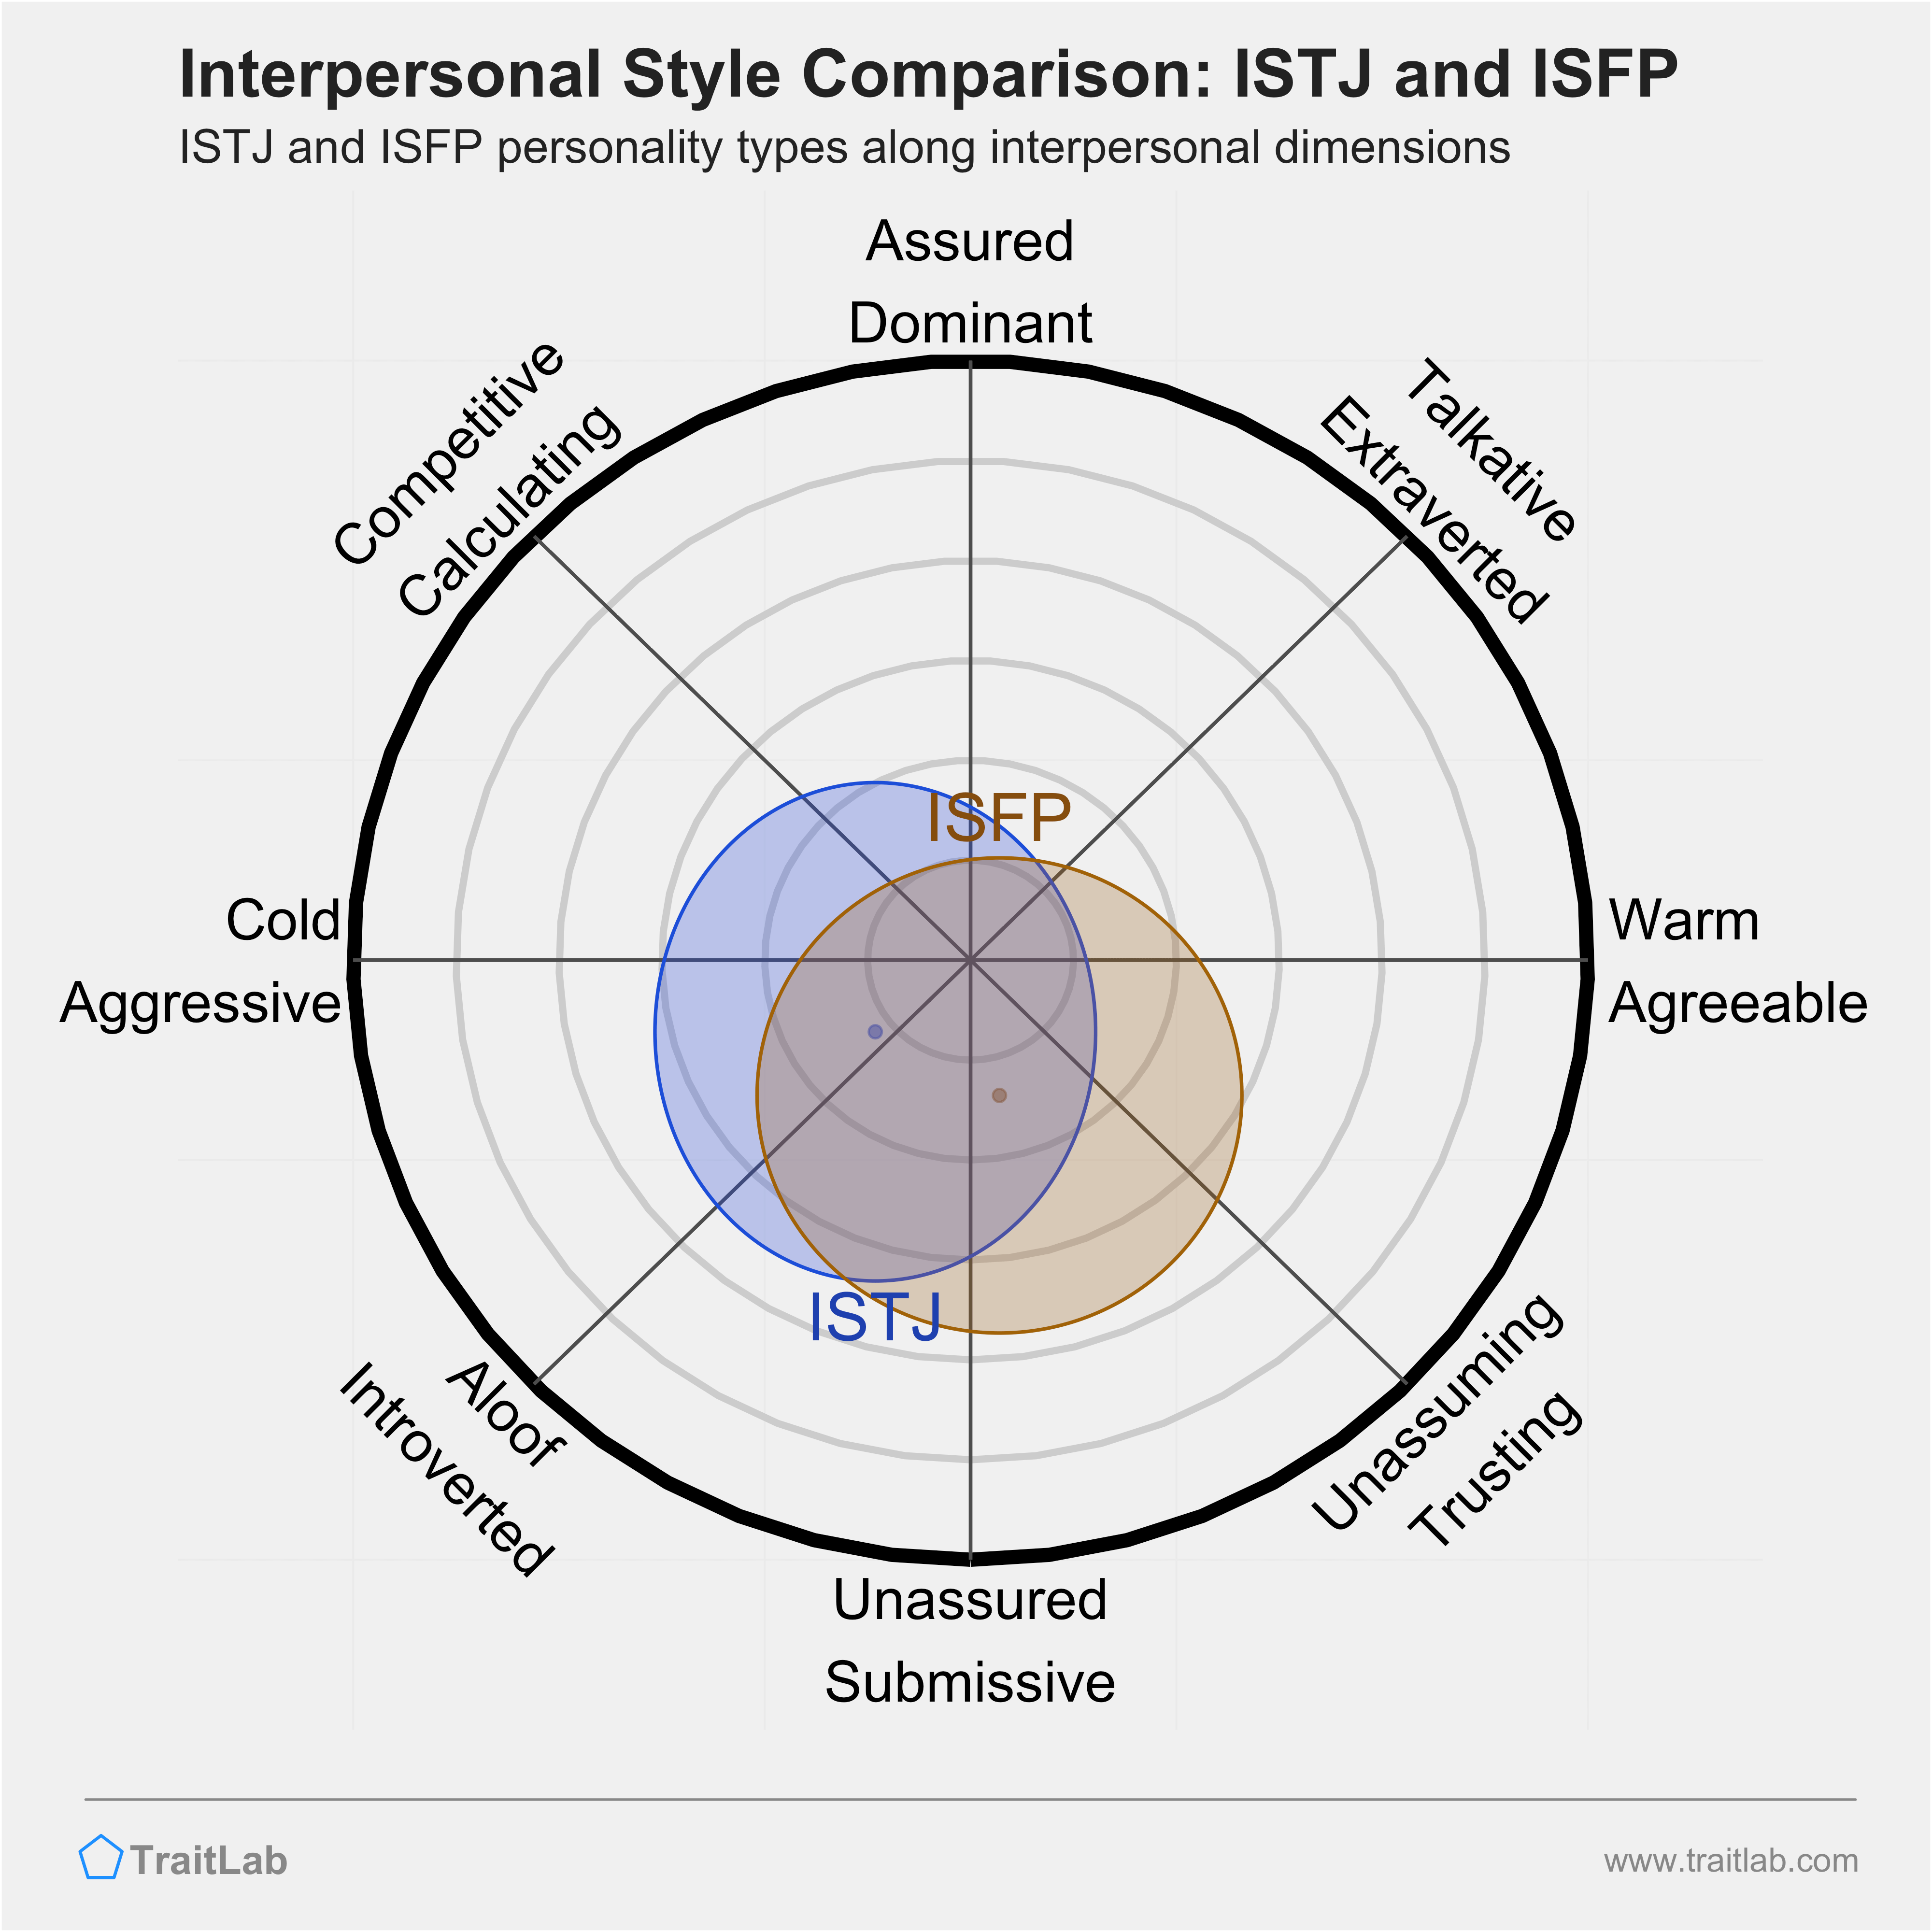 ISTJ and ISFP comparison across interpersonal dimensions